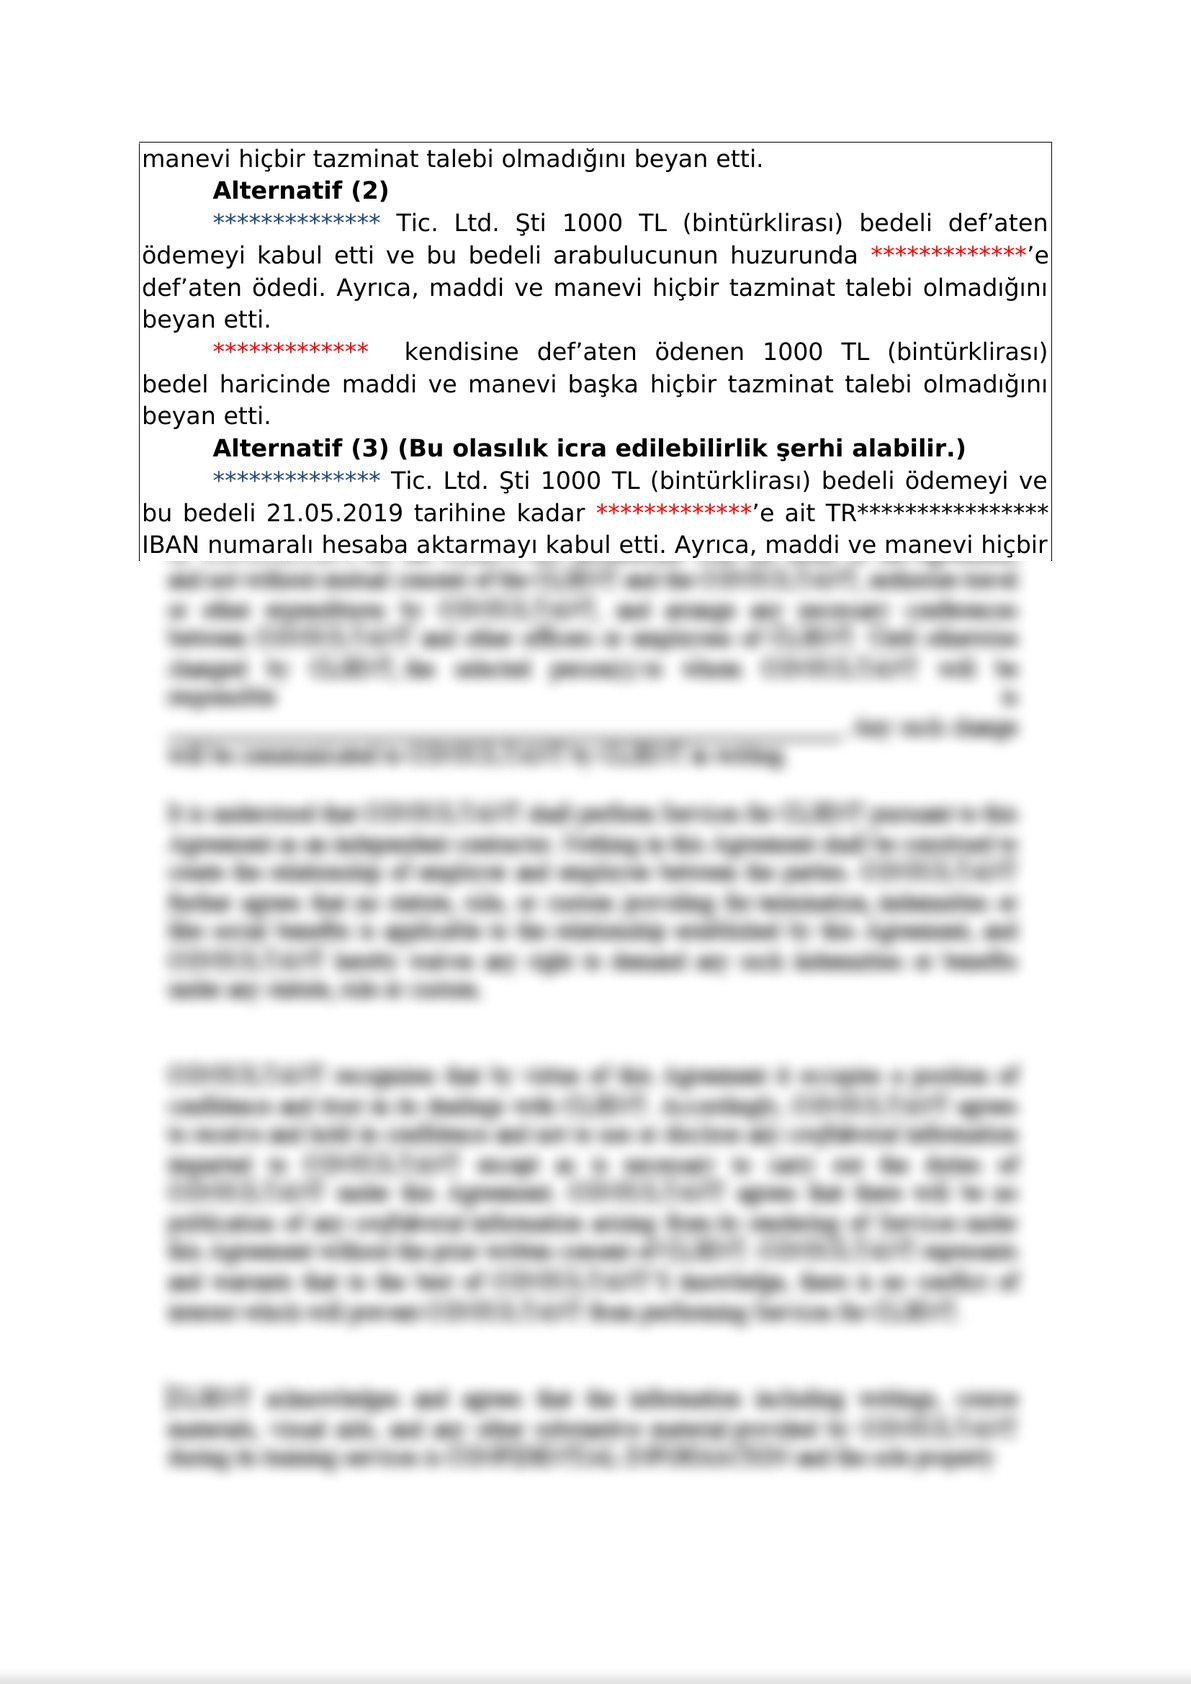 Mediation Settlement Agreement  on Commercial Disputes - Turkish-1